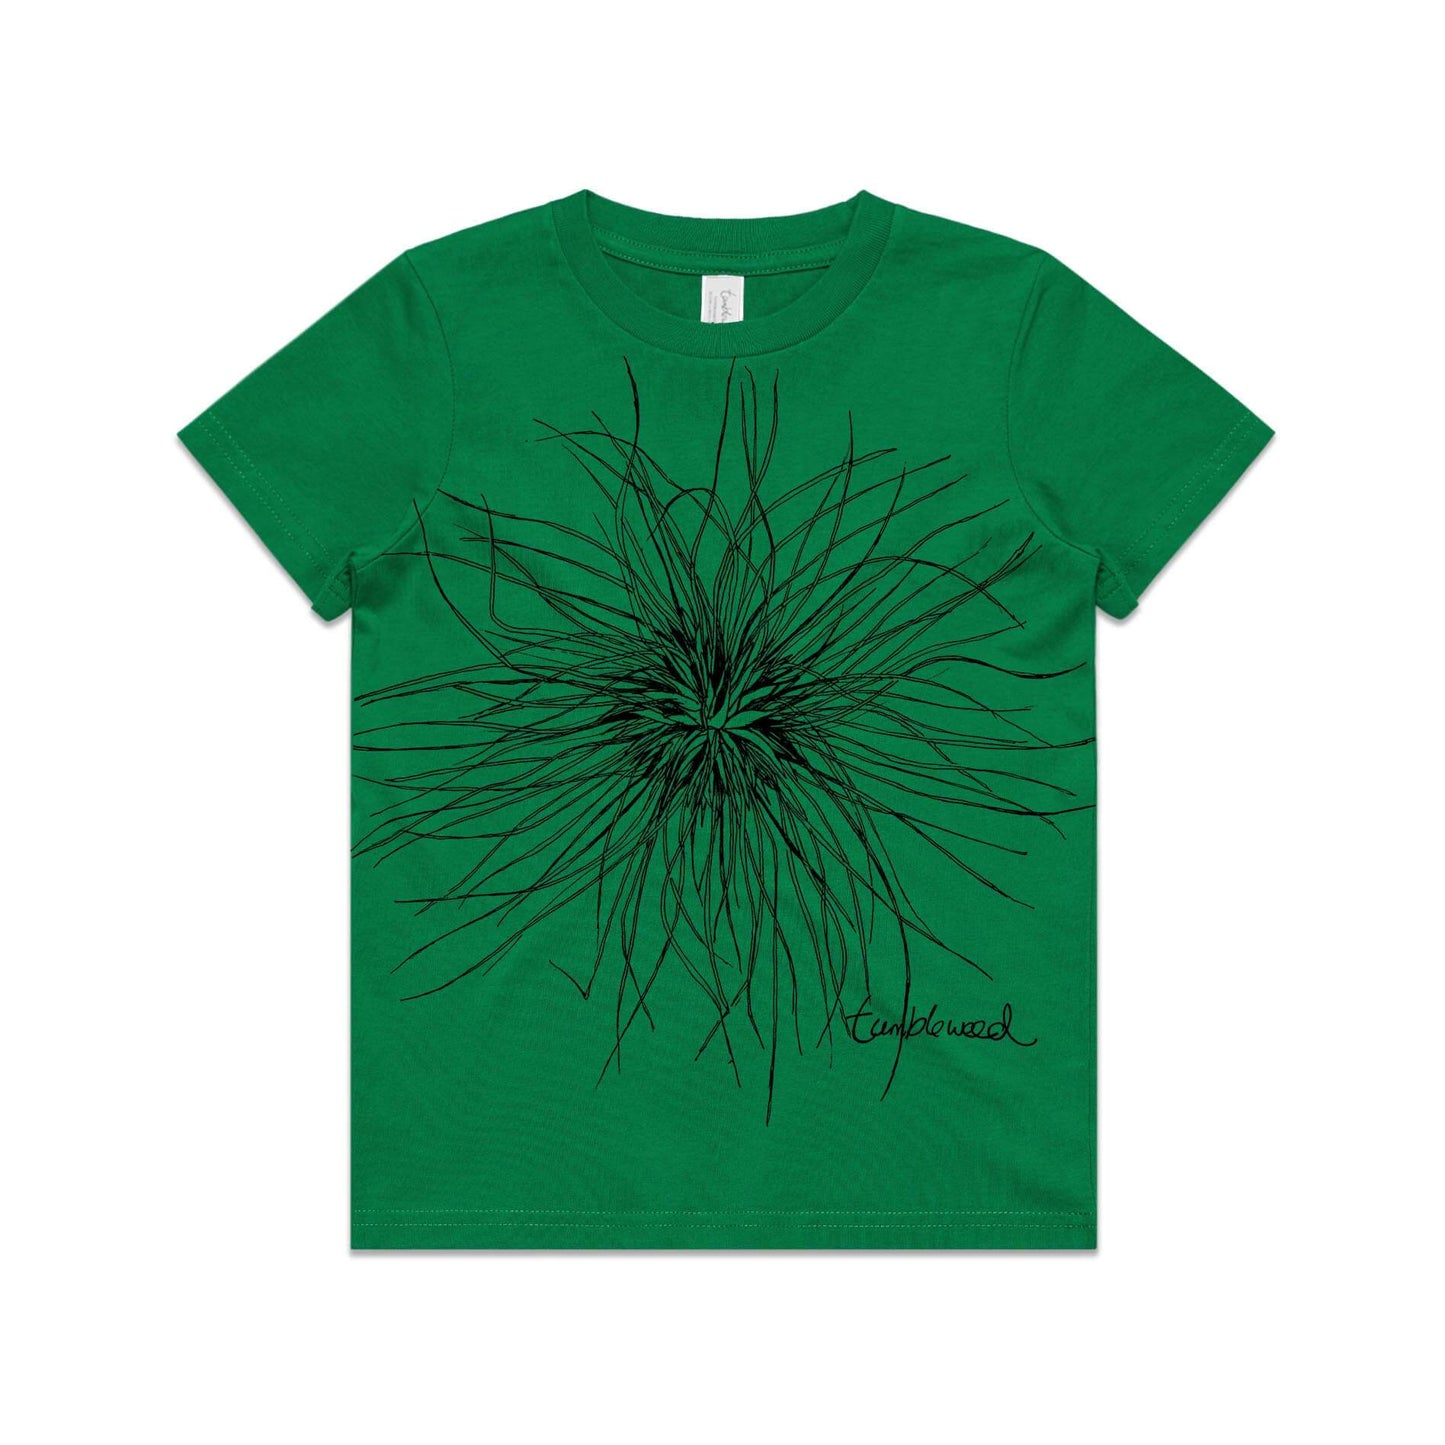 Green, cotton kids' t-shirt with screen printed Kids tumbleweed/spinifex design.